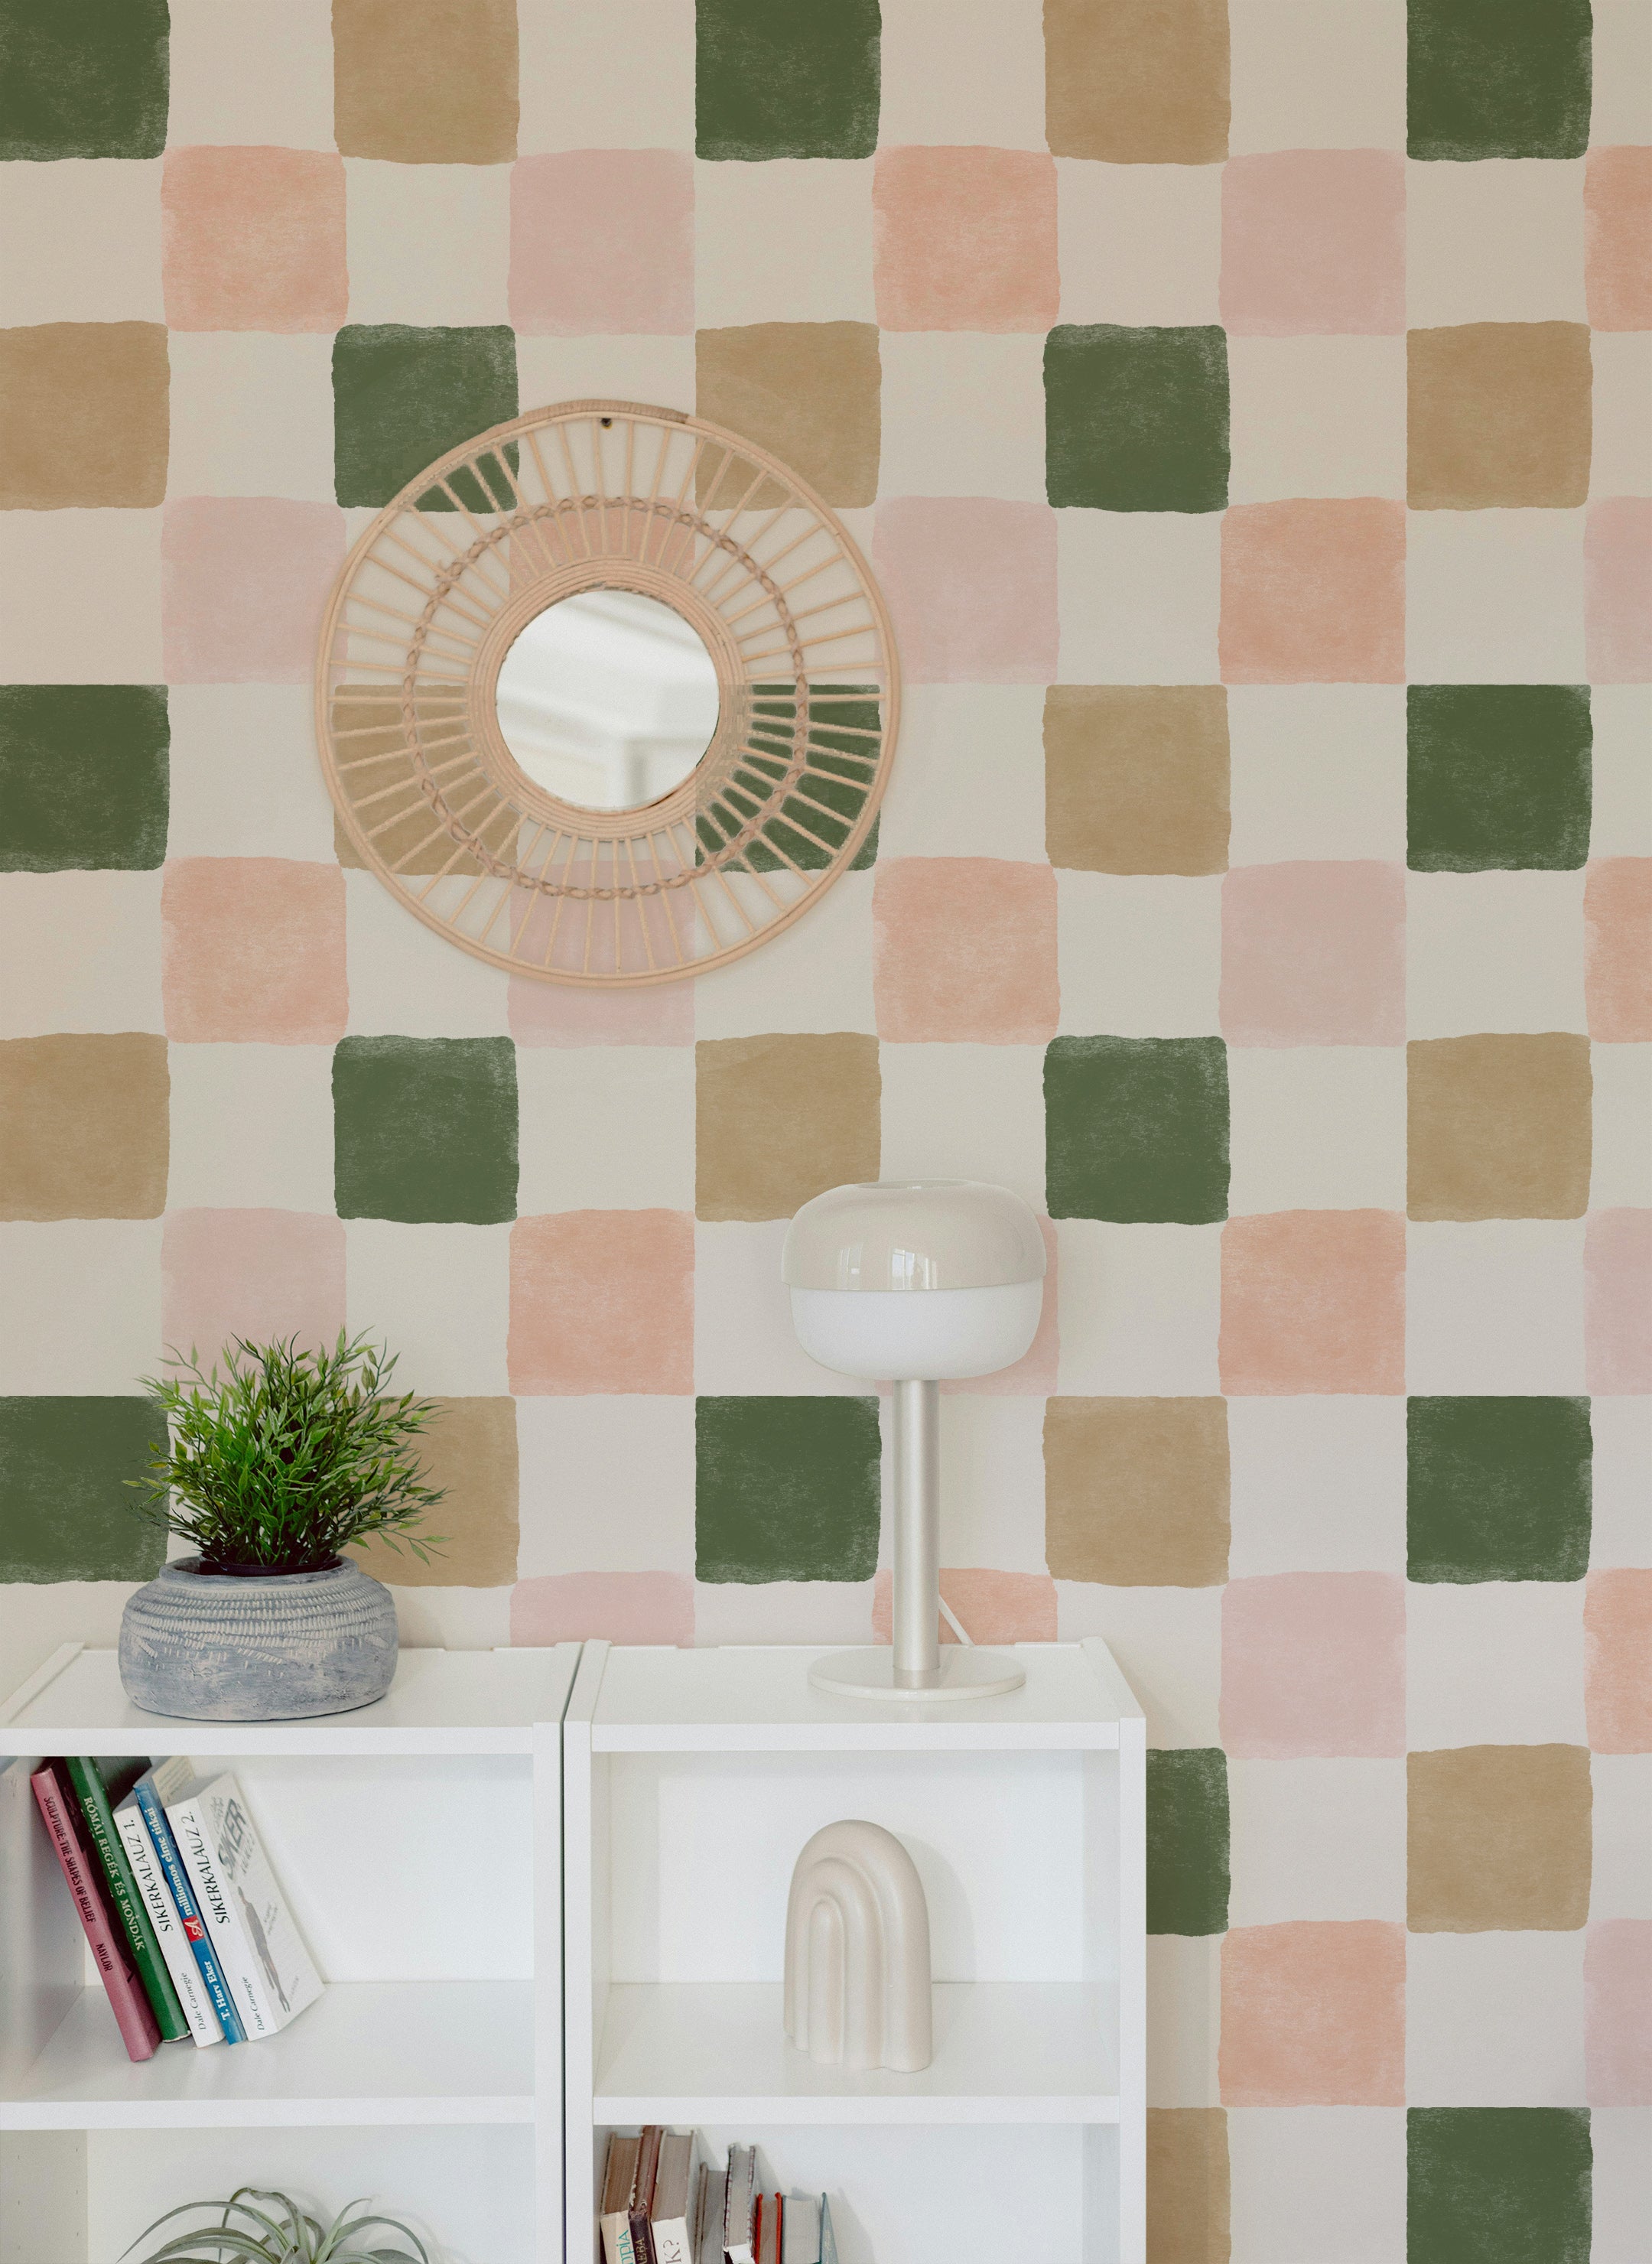 A stylish interior decorated with Clémence Wallpaper II, featuring a checkered pattern in pastel shades of pink, green, and beige. The room includes white shelves, a potted plant, a modern lamp, and a round woven mirror.